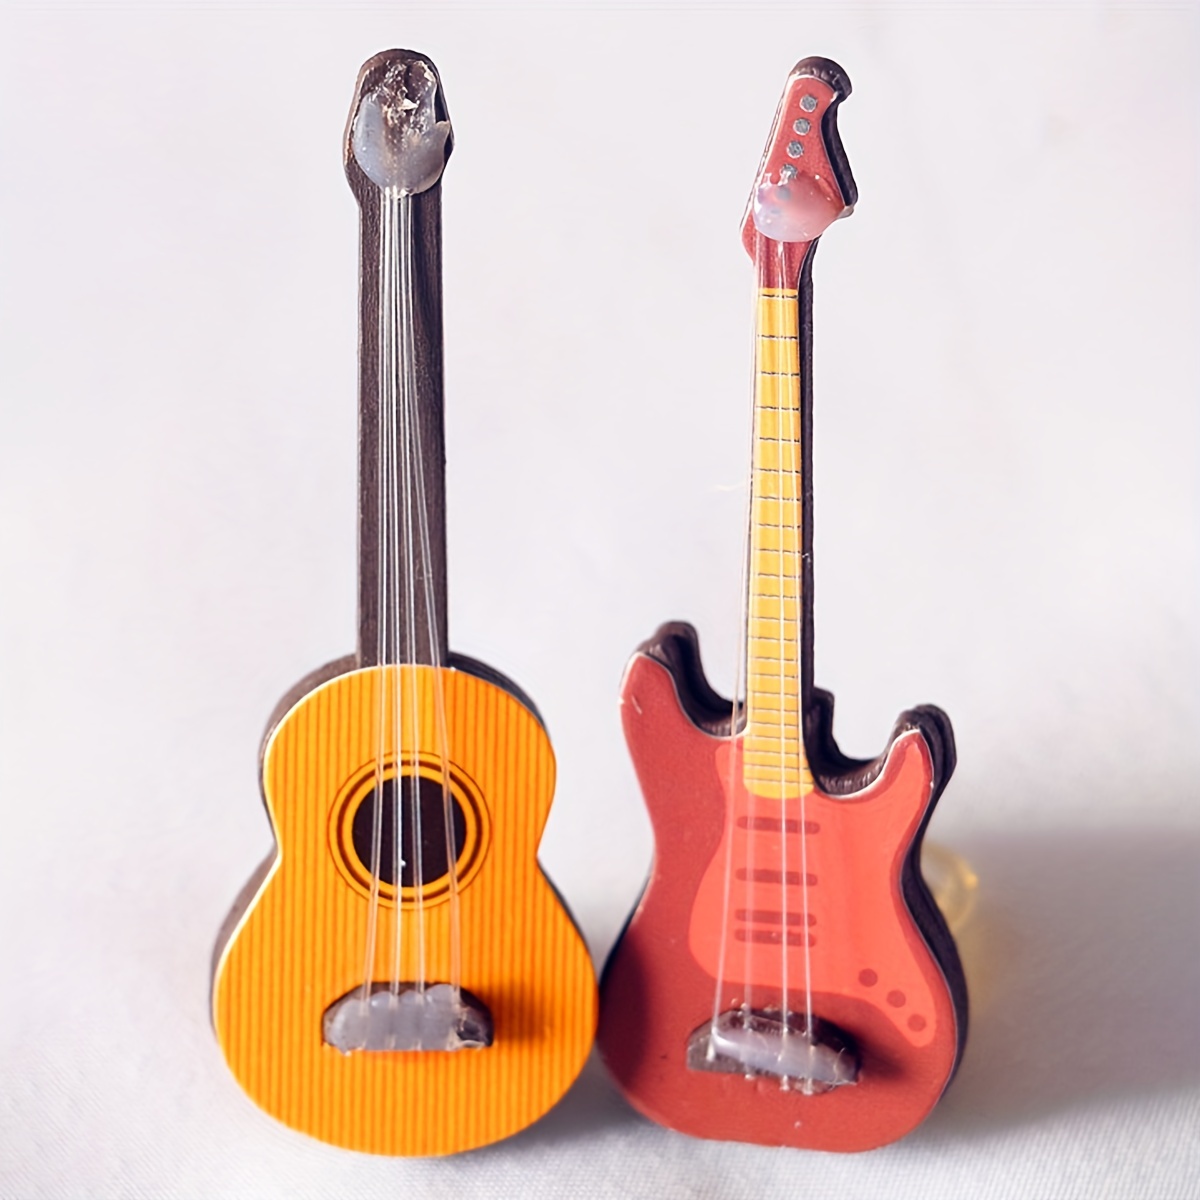 Mini Guitar Portable Wood Guitar Wooden Miniature Musical Instrument  Display with Stand Case Gift Toy Home Decor